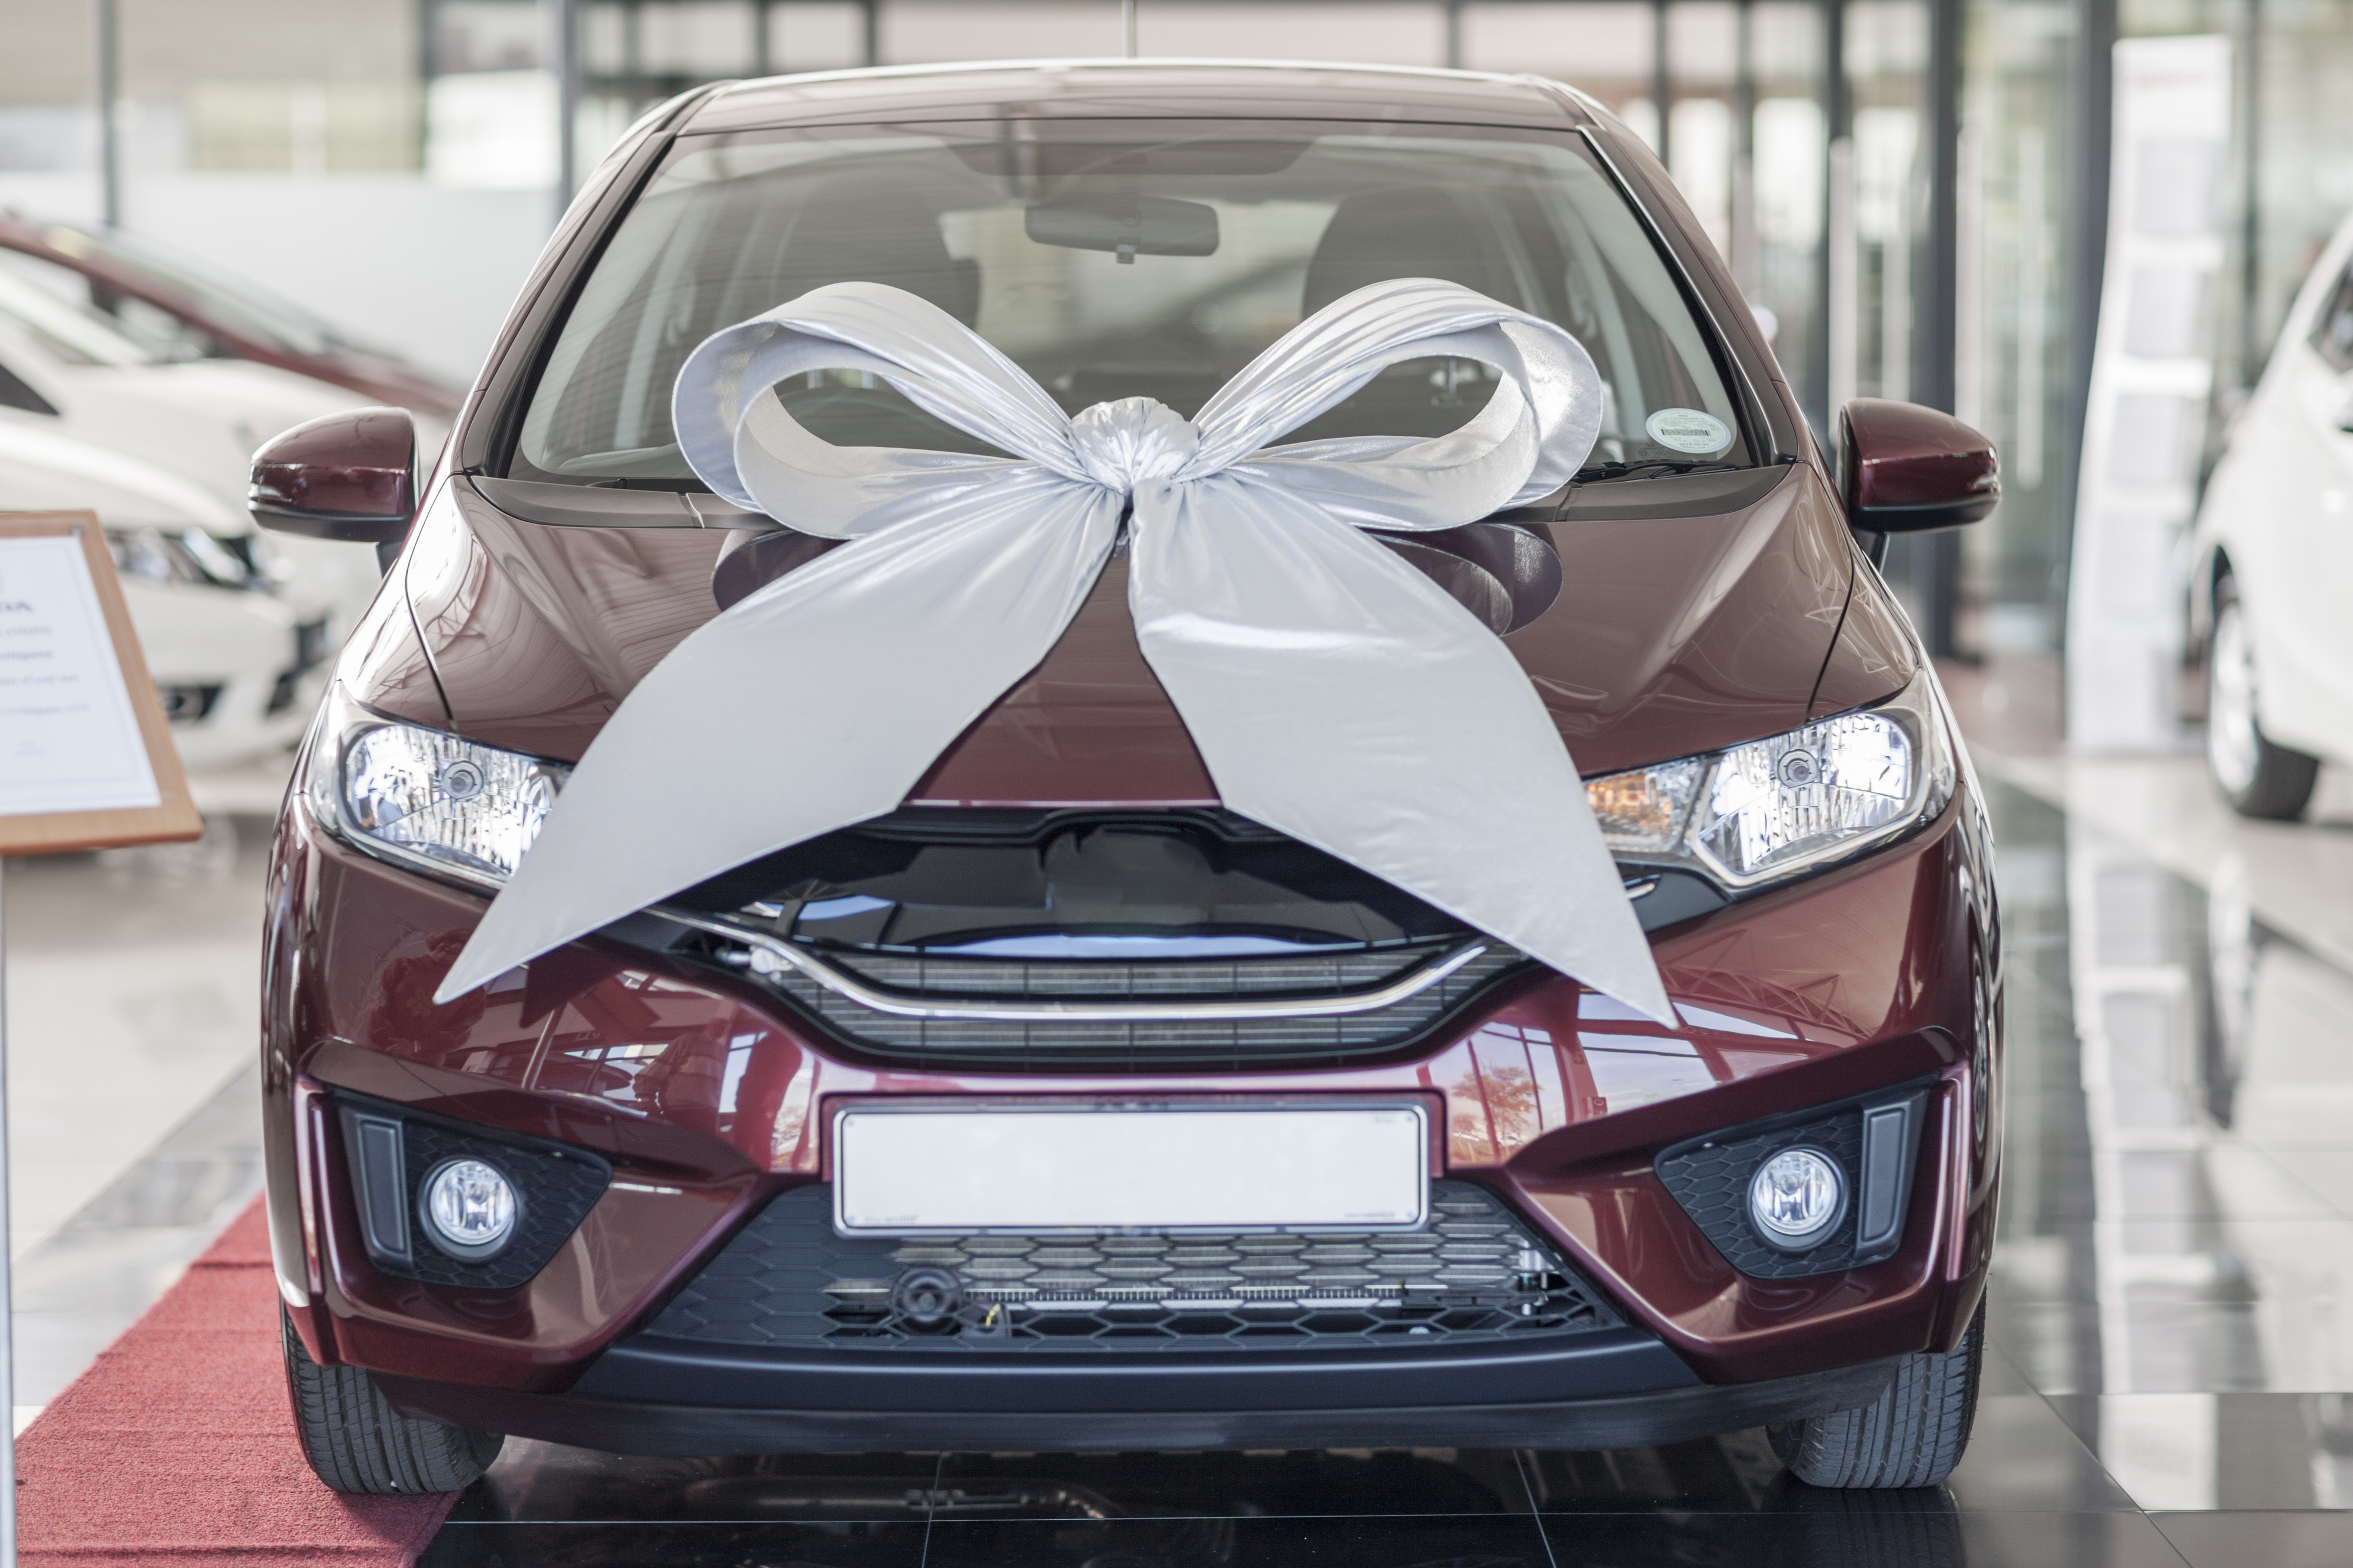 A brand-new car with a large ribbon on it